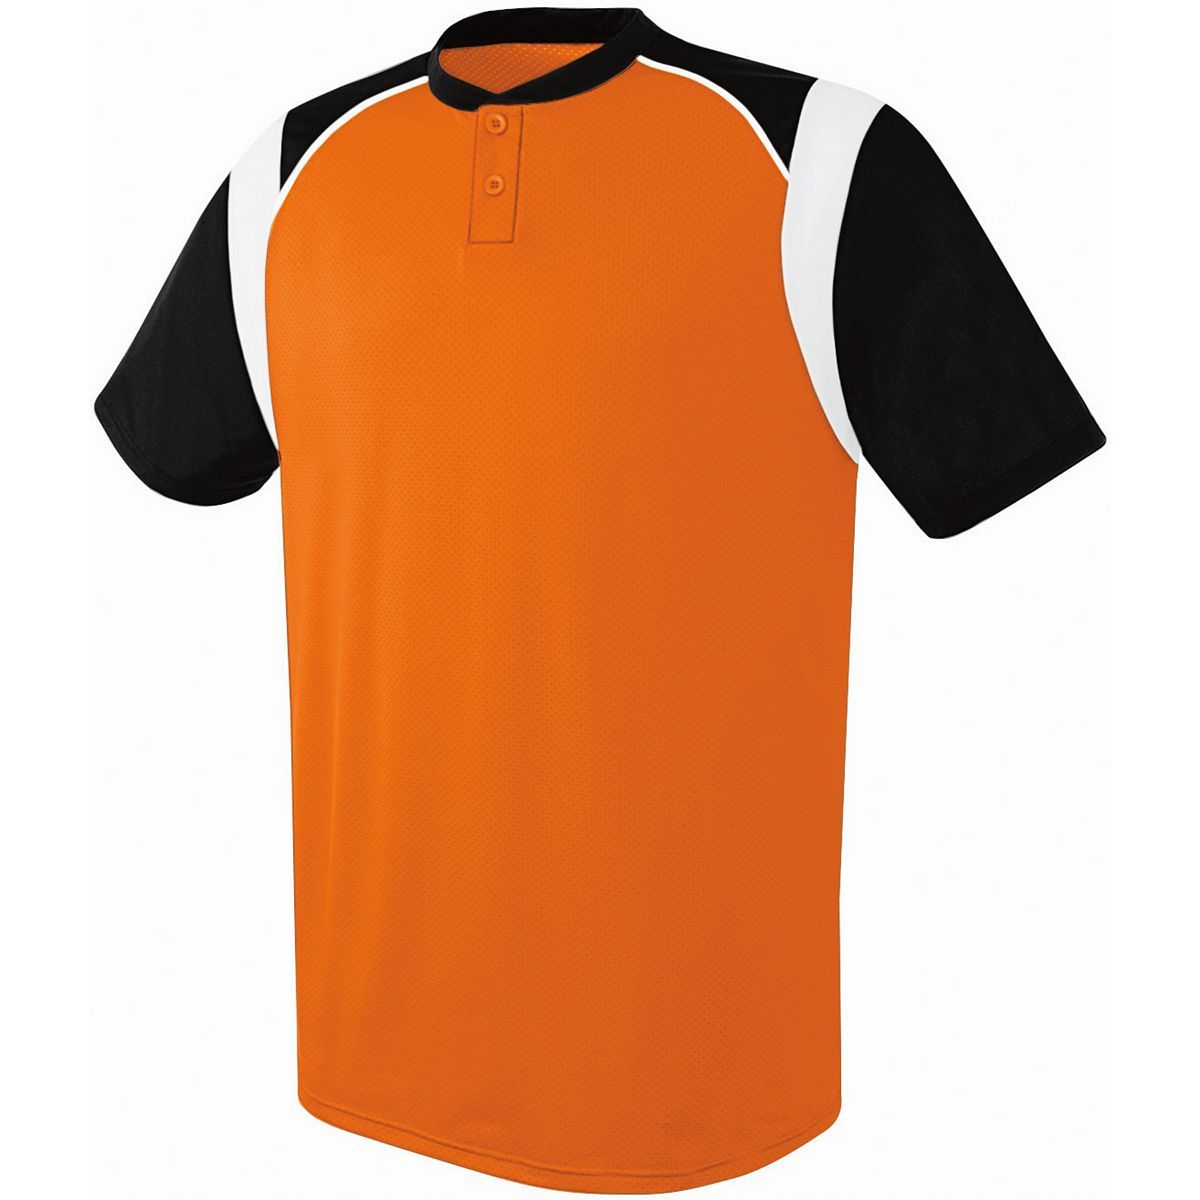 Augusta Sportswear Wildcard Two-Button Jersey in Orange/Black/White  -Part of the Adult, Adult-Jersey, Augusta-Products, Baseball, Shirts, All-Sports, All-Sports-1 product lines at KanaleyCreations.com